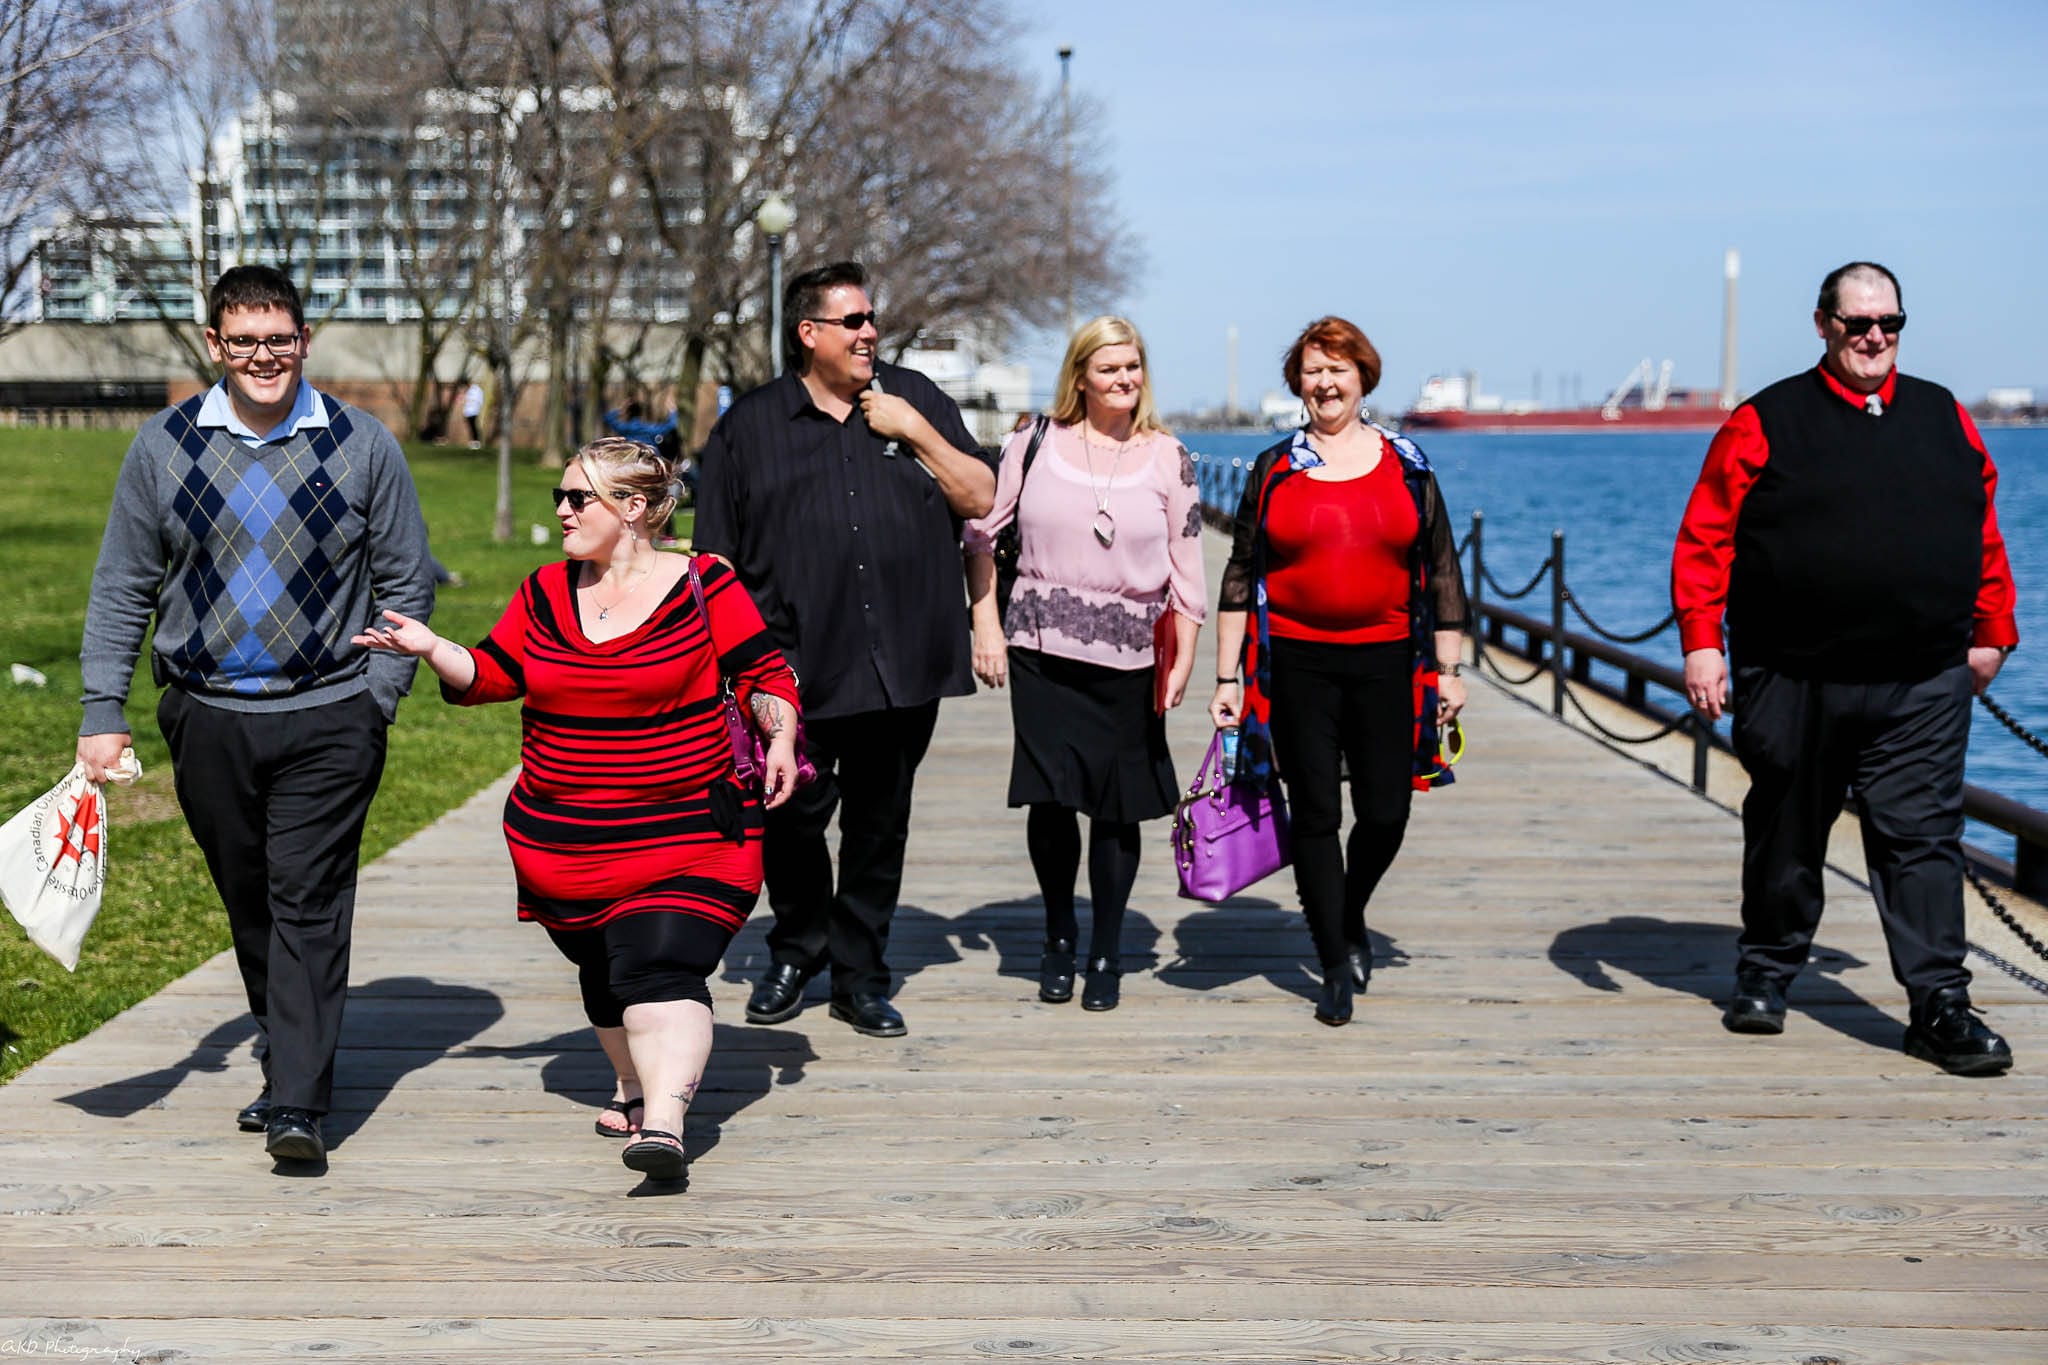 A group of six adults walking together on a wooden boardwalk by a lakeside, carrying shopping bags and smiling on a sunny day.